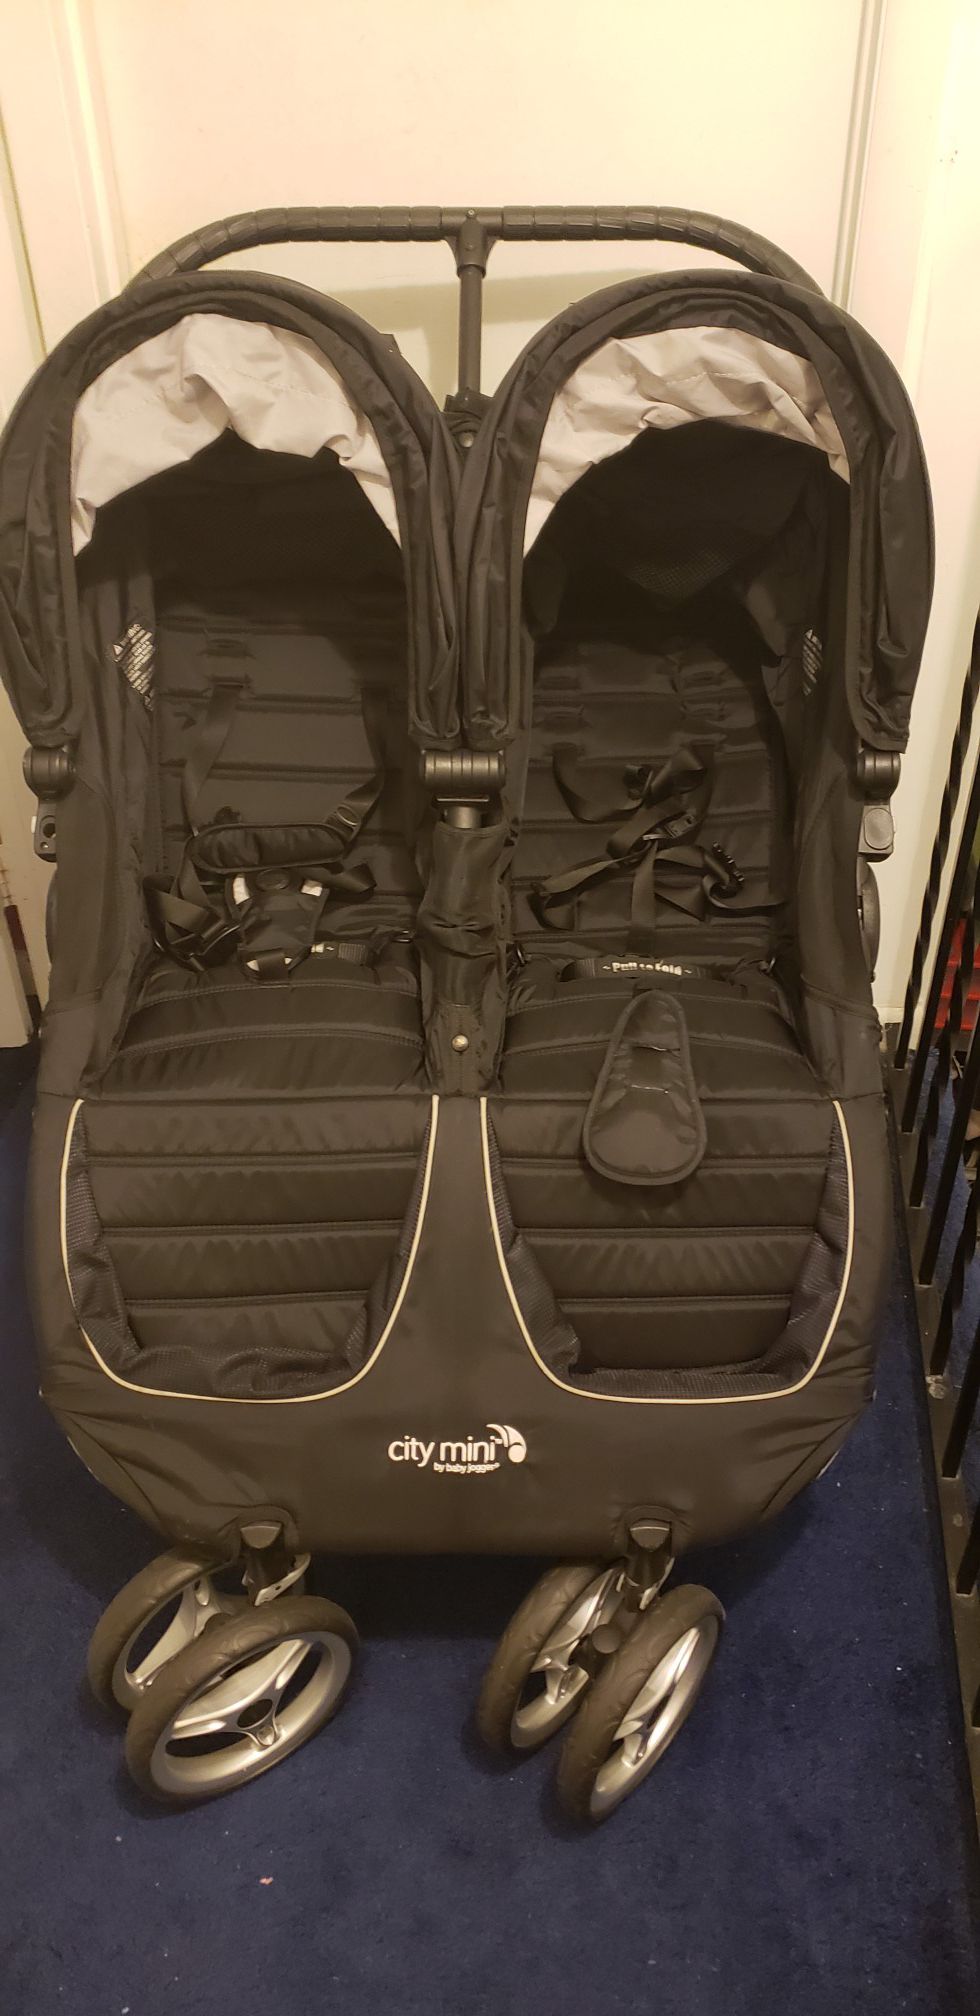 City Mini by Baby Jogger double stroller